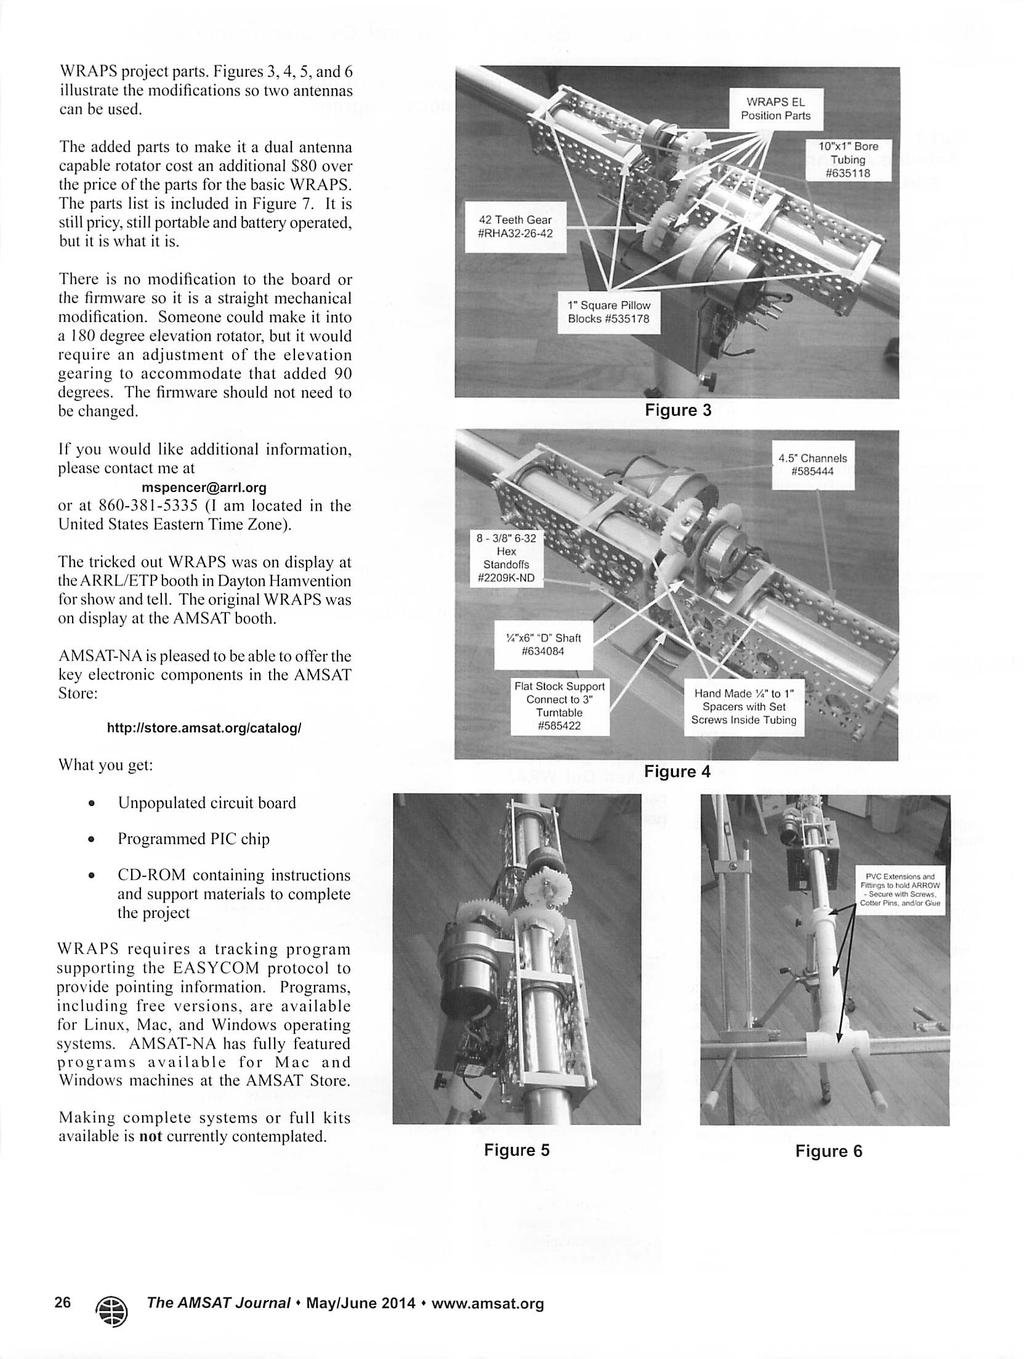 WRAPS project parts. Figures 3,4,5, and 6 illustrate the modifications so two antennas can be used.